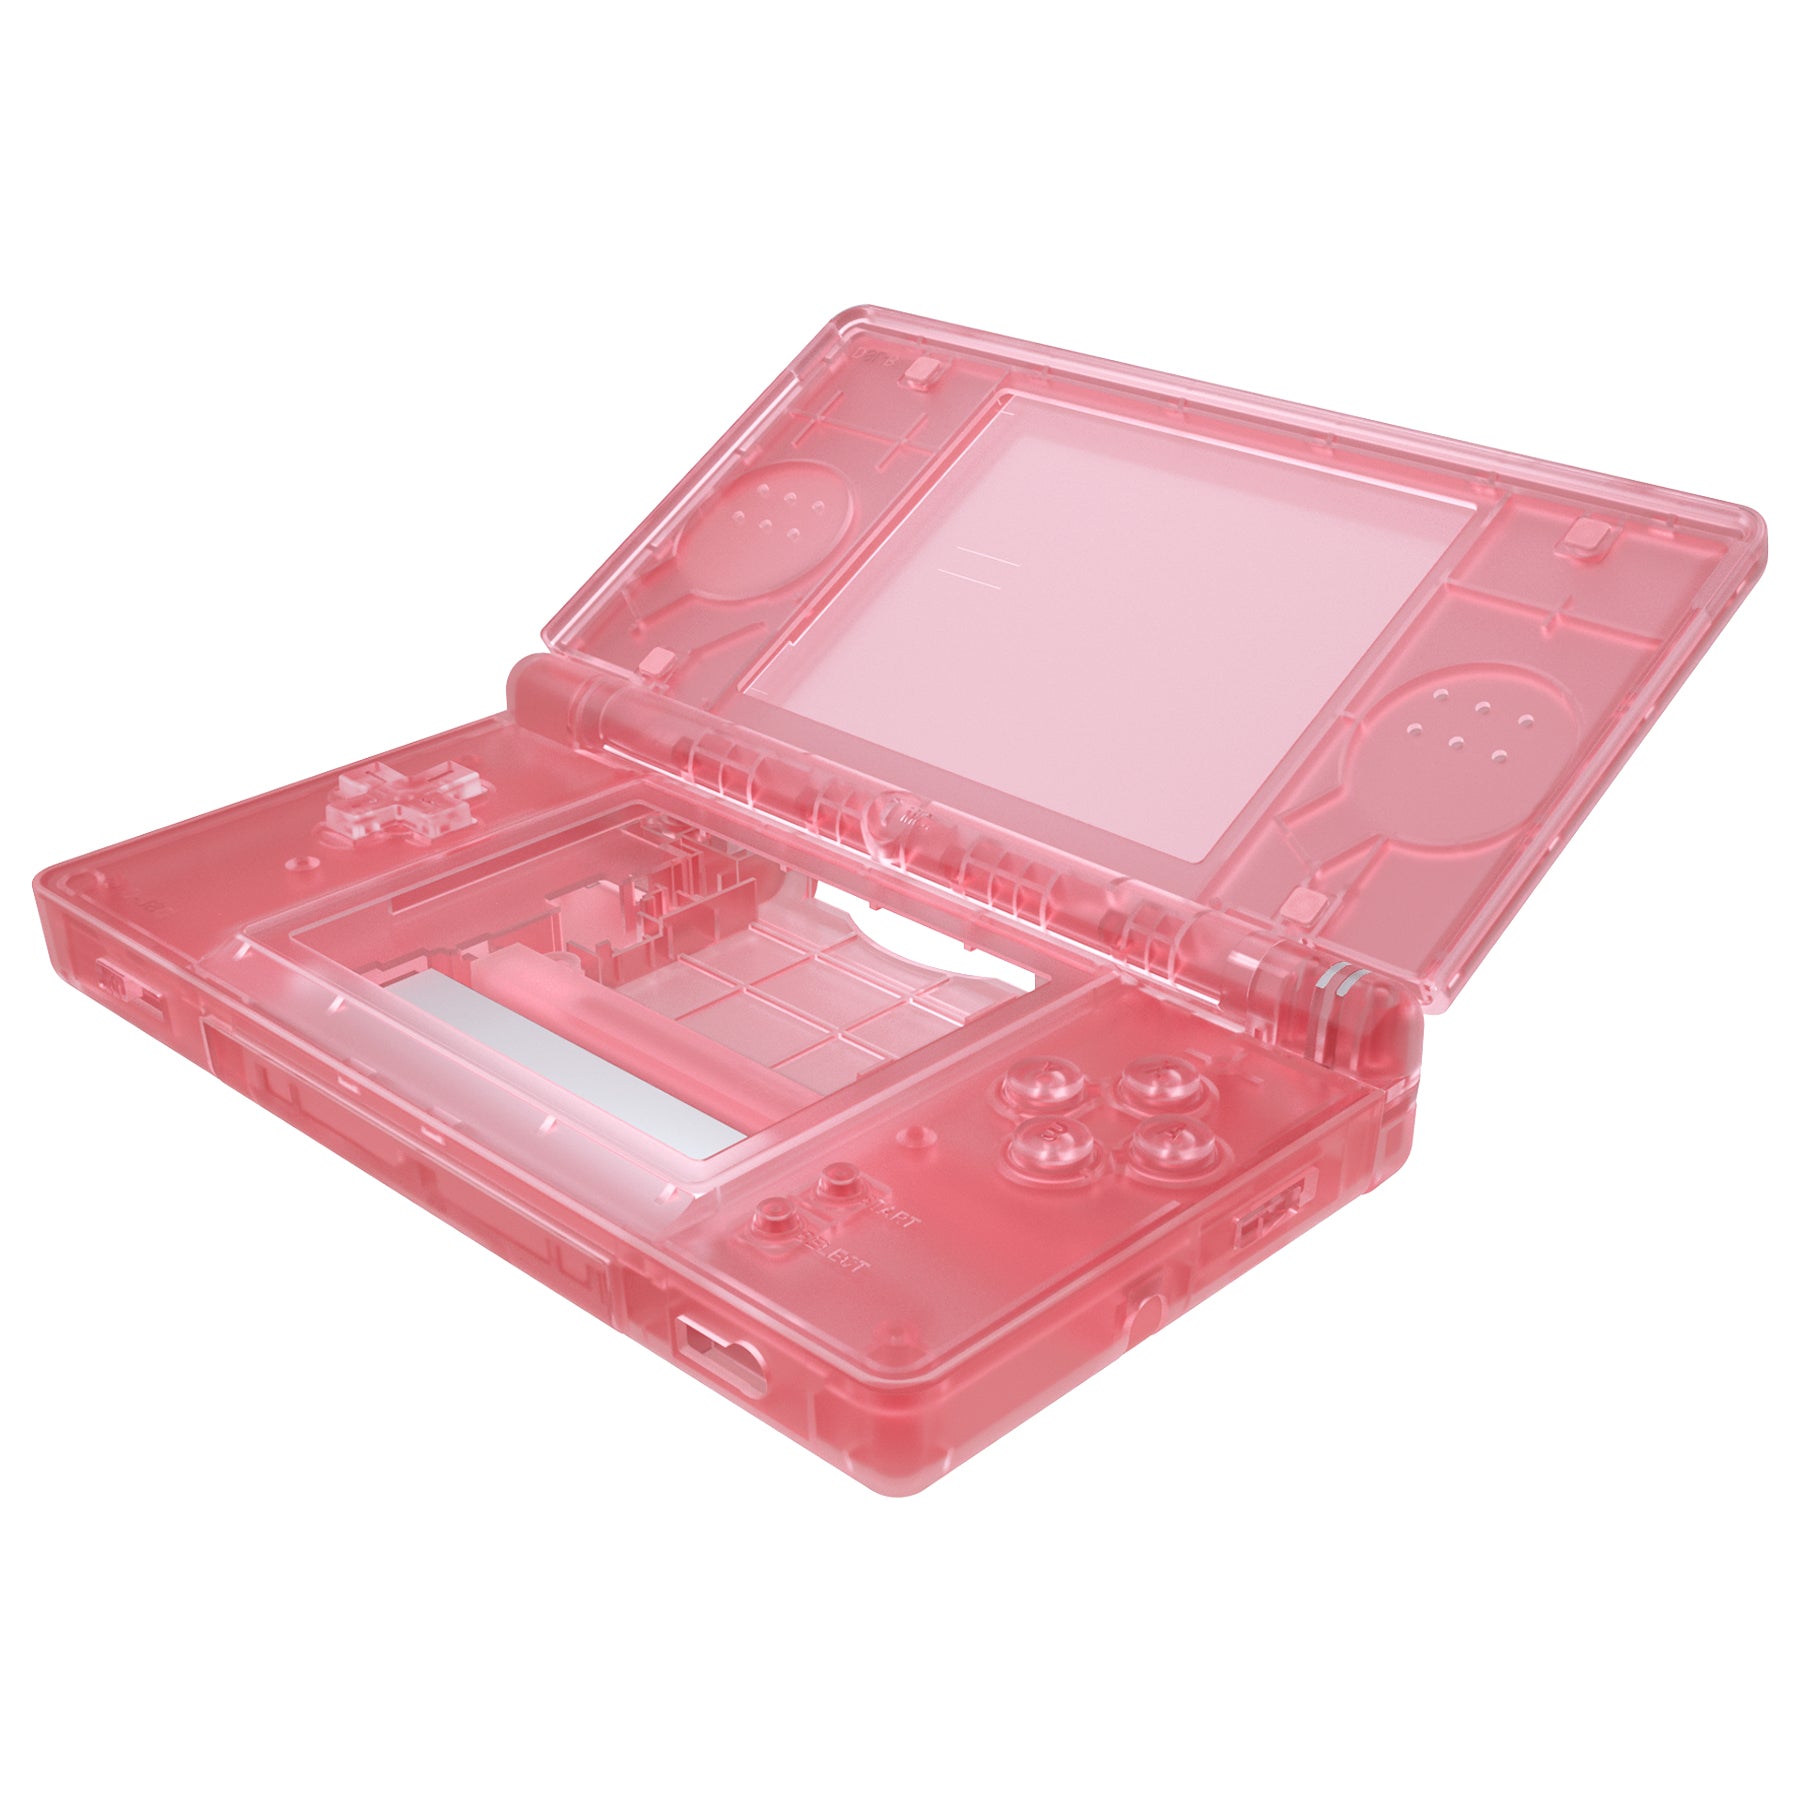 eXtremeRate Retail Cherry Pink Replacement Full Housing Shell for Nintendo DS Lite, Custom Handheld Console Case Cover with Buttons, Screen Lens for Nintendo DS Lite NDSL - Console NOT Included - DSLM5007